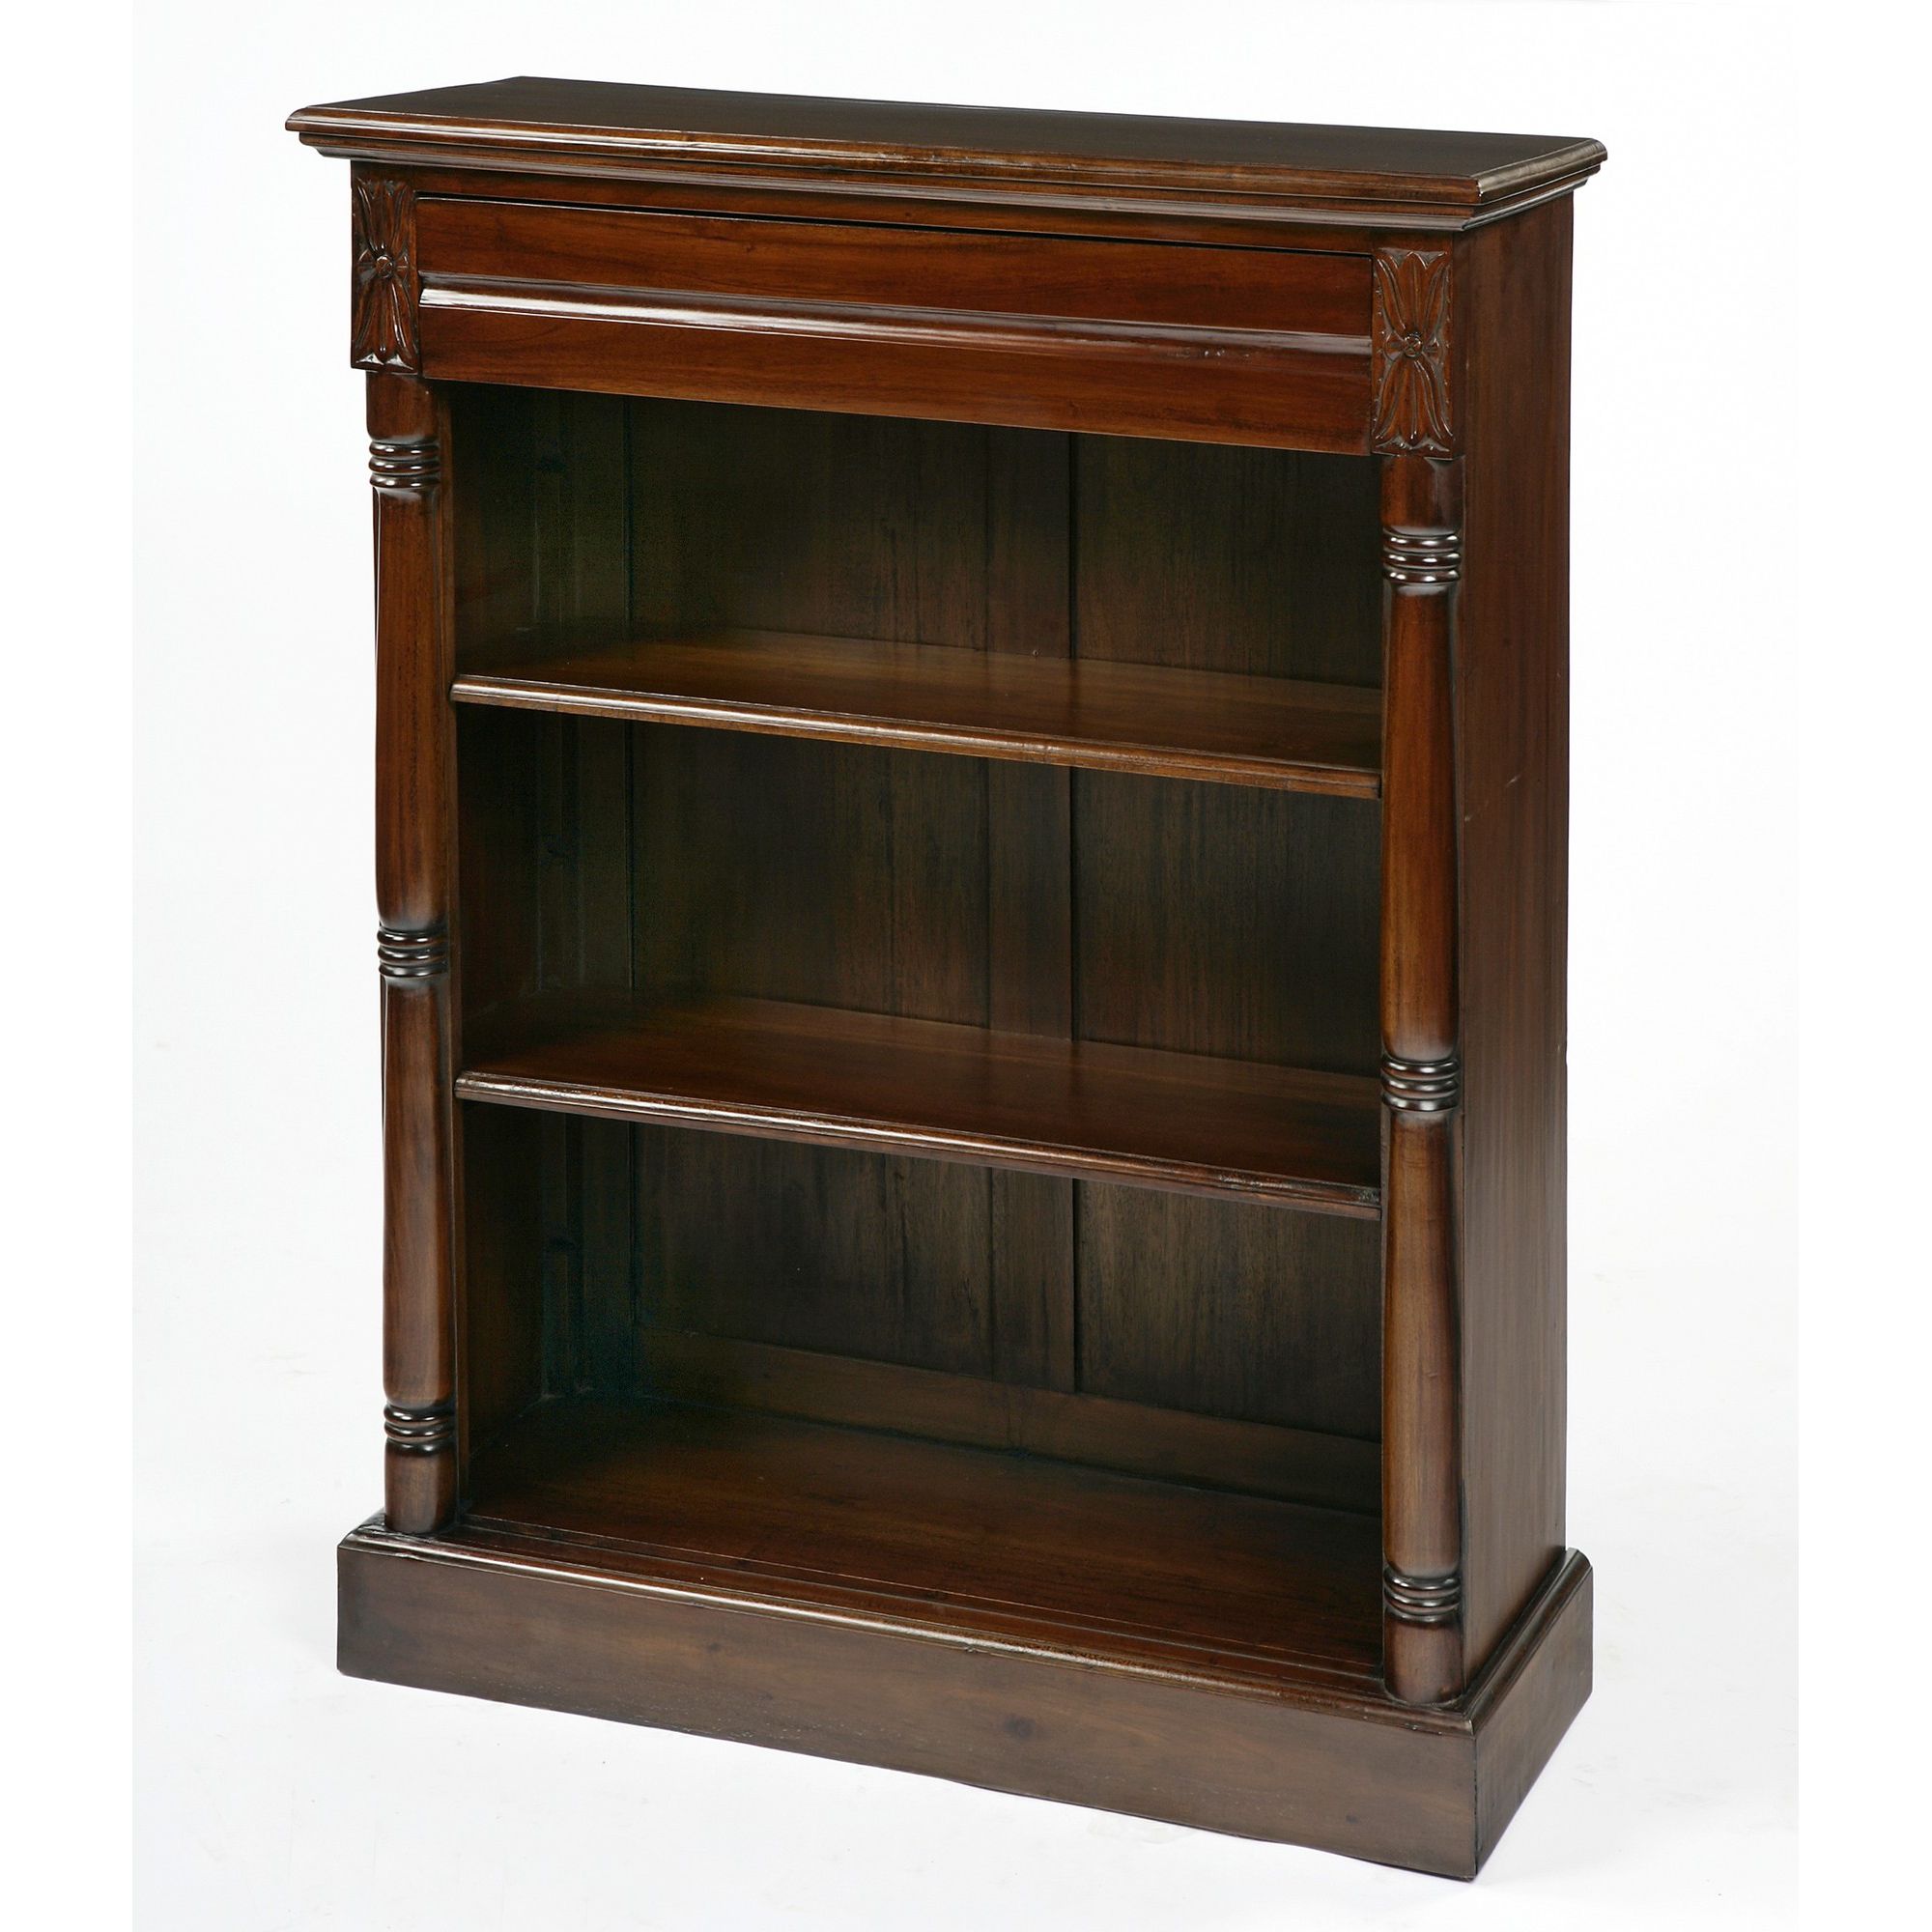 Anderson Bradshaw Colonial Low Open Bookcase in Mahogany at Tesco Direct